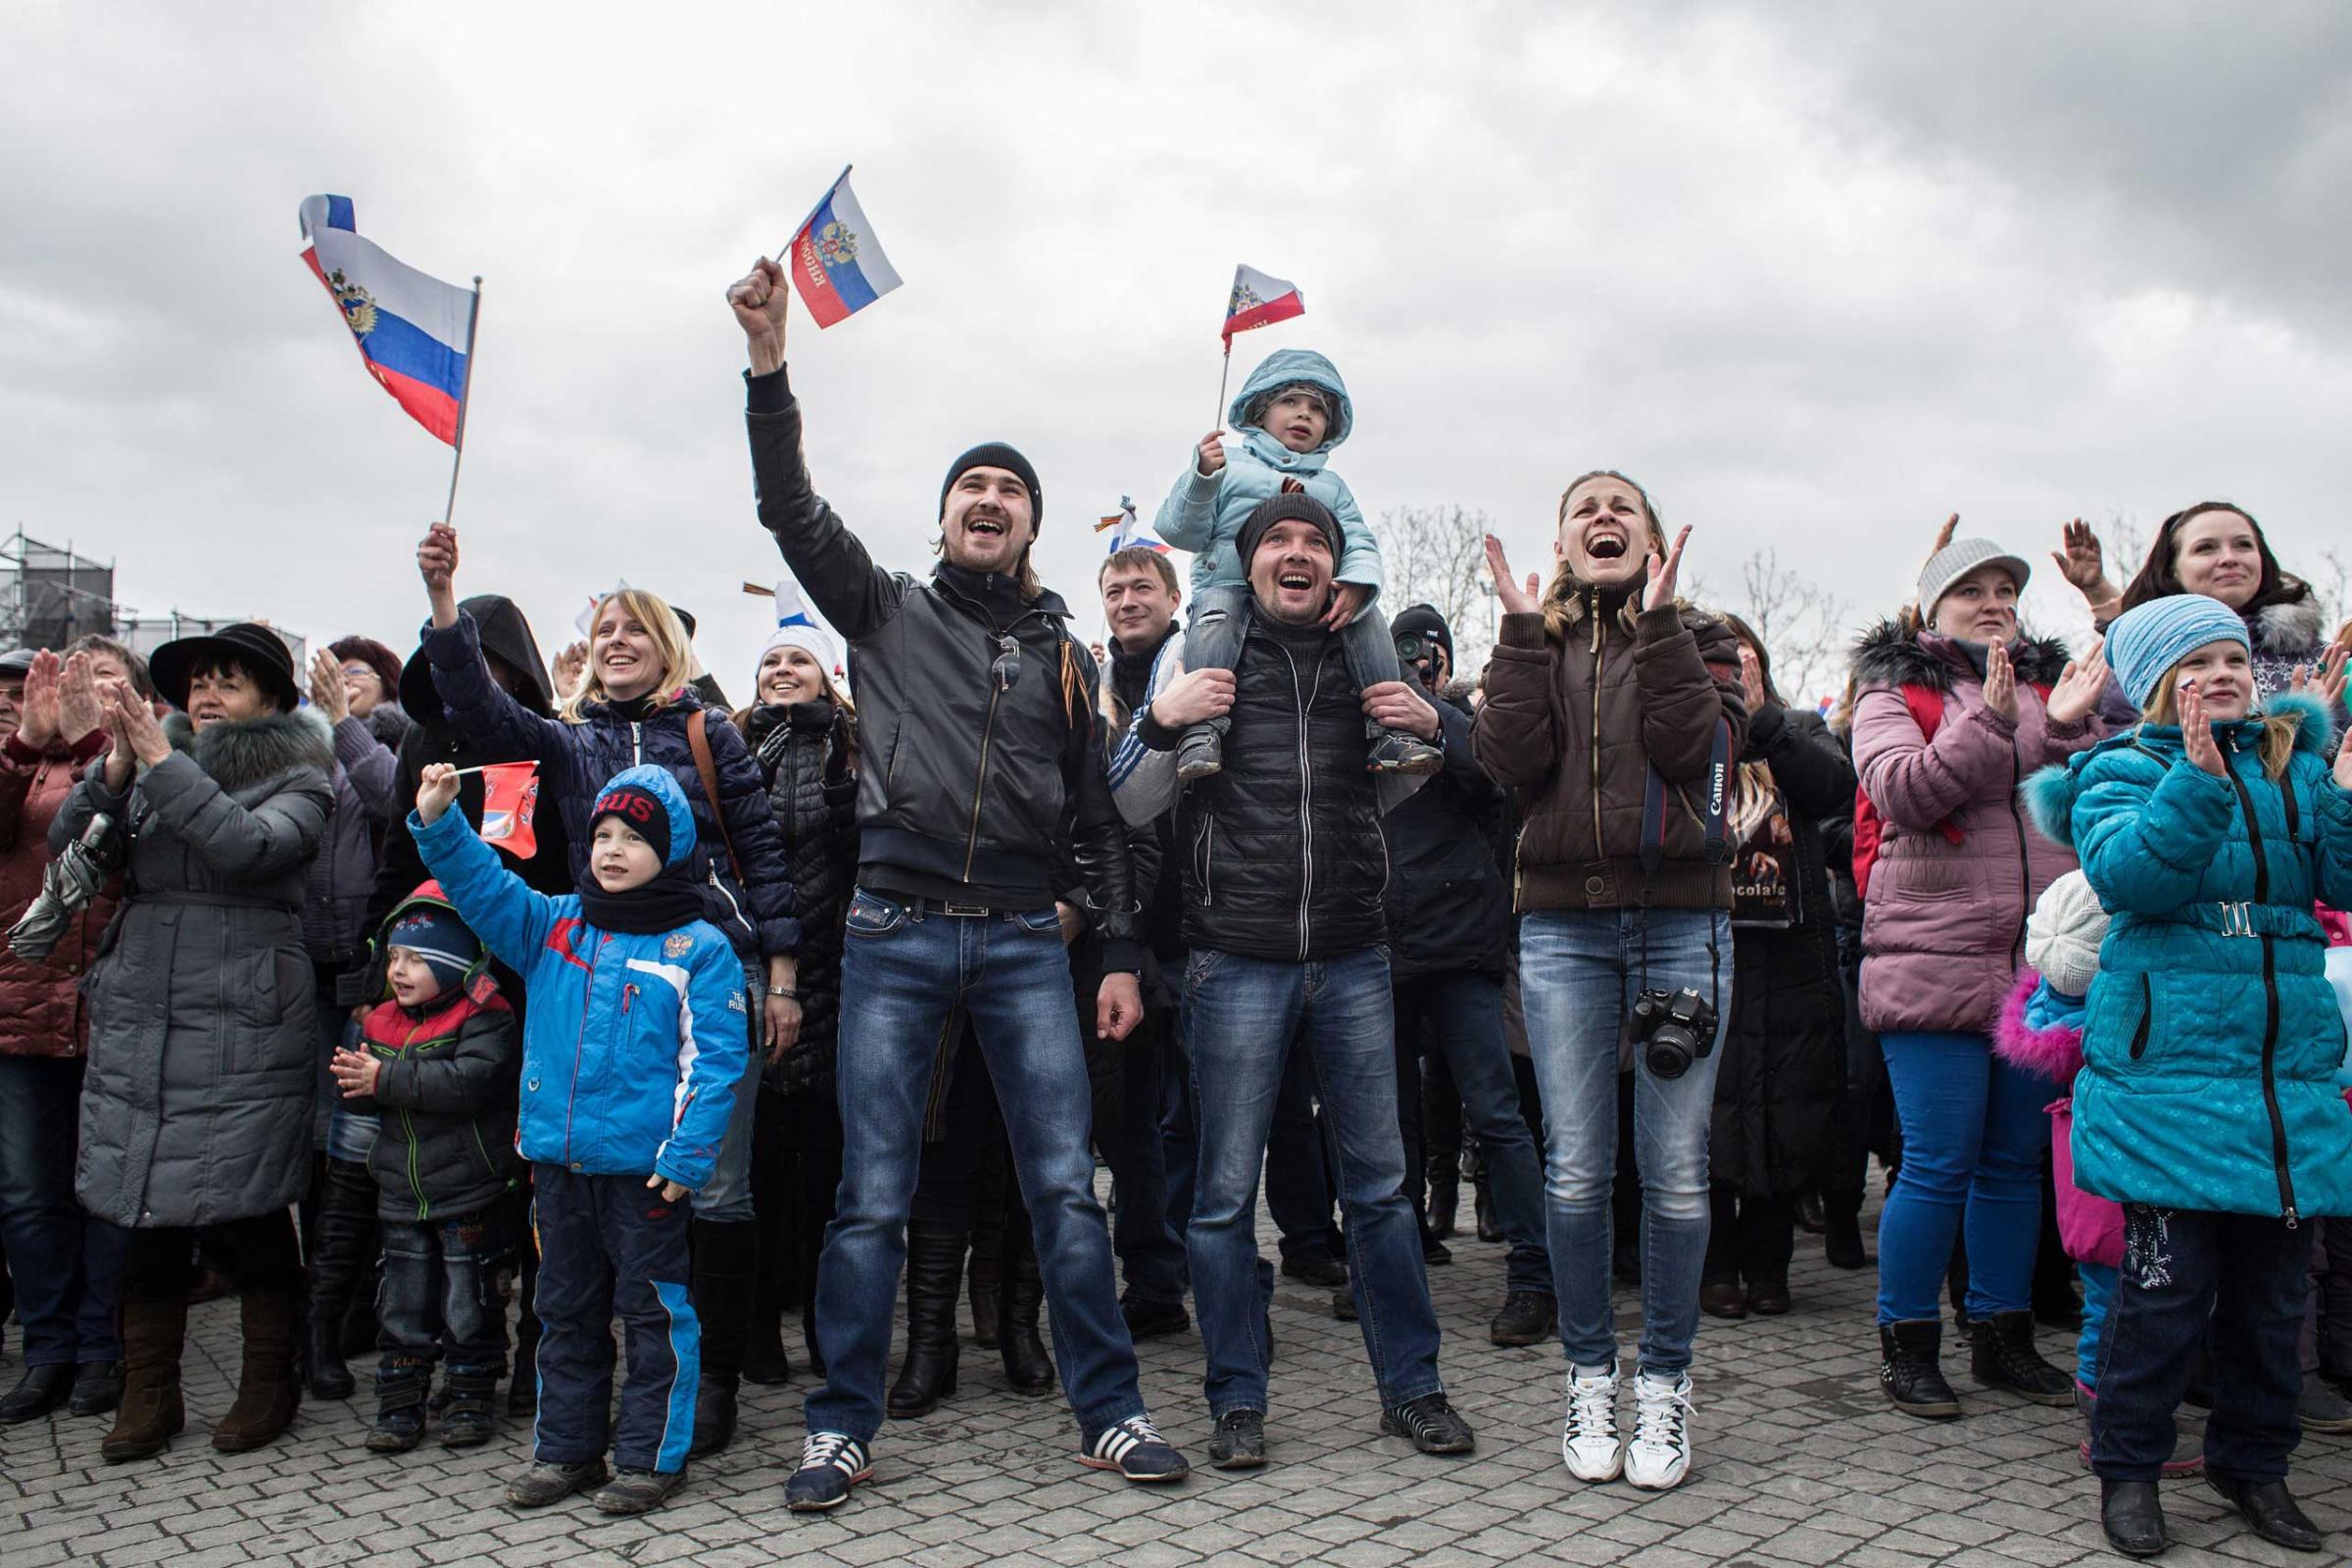 People celebrate the first anniversary of the annexation, March 18, 2015 in Sevastopol.